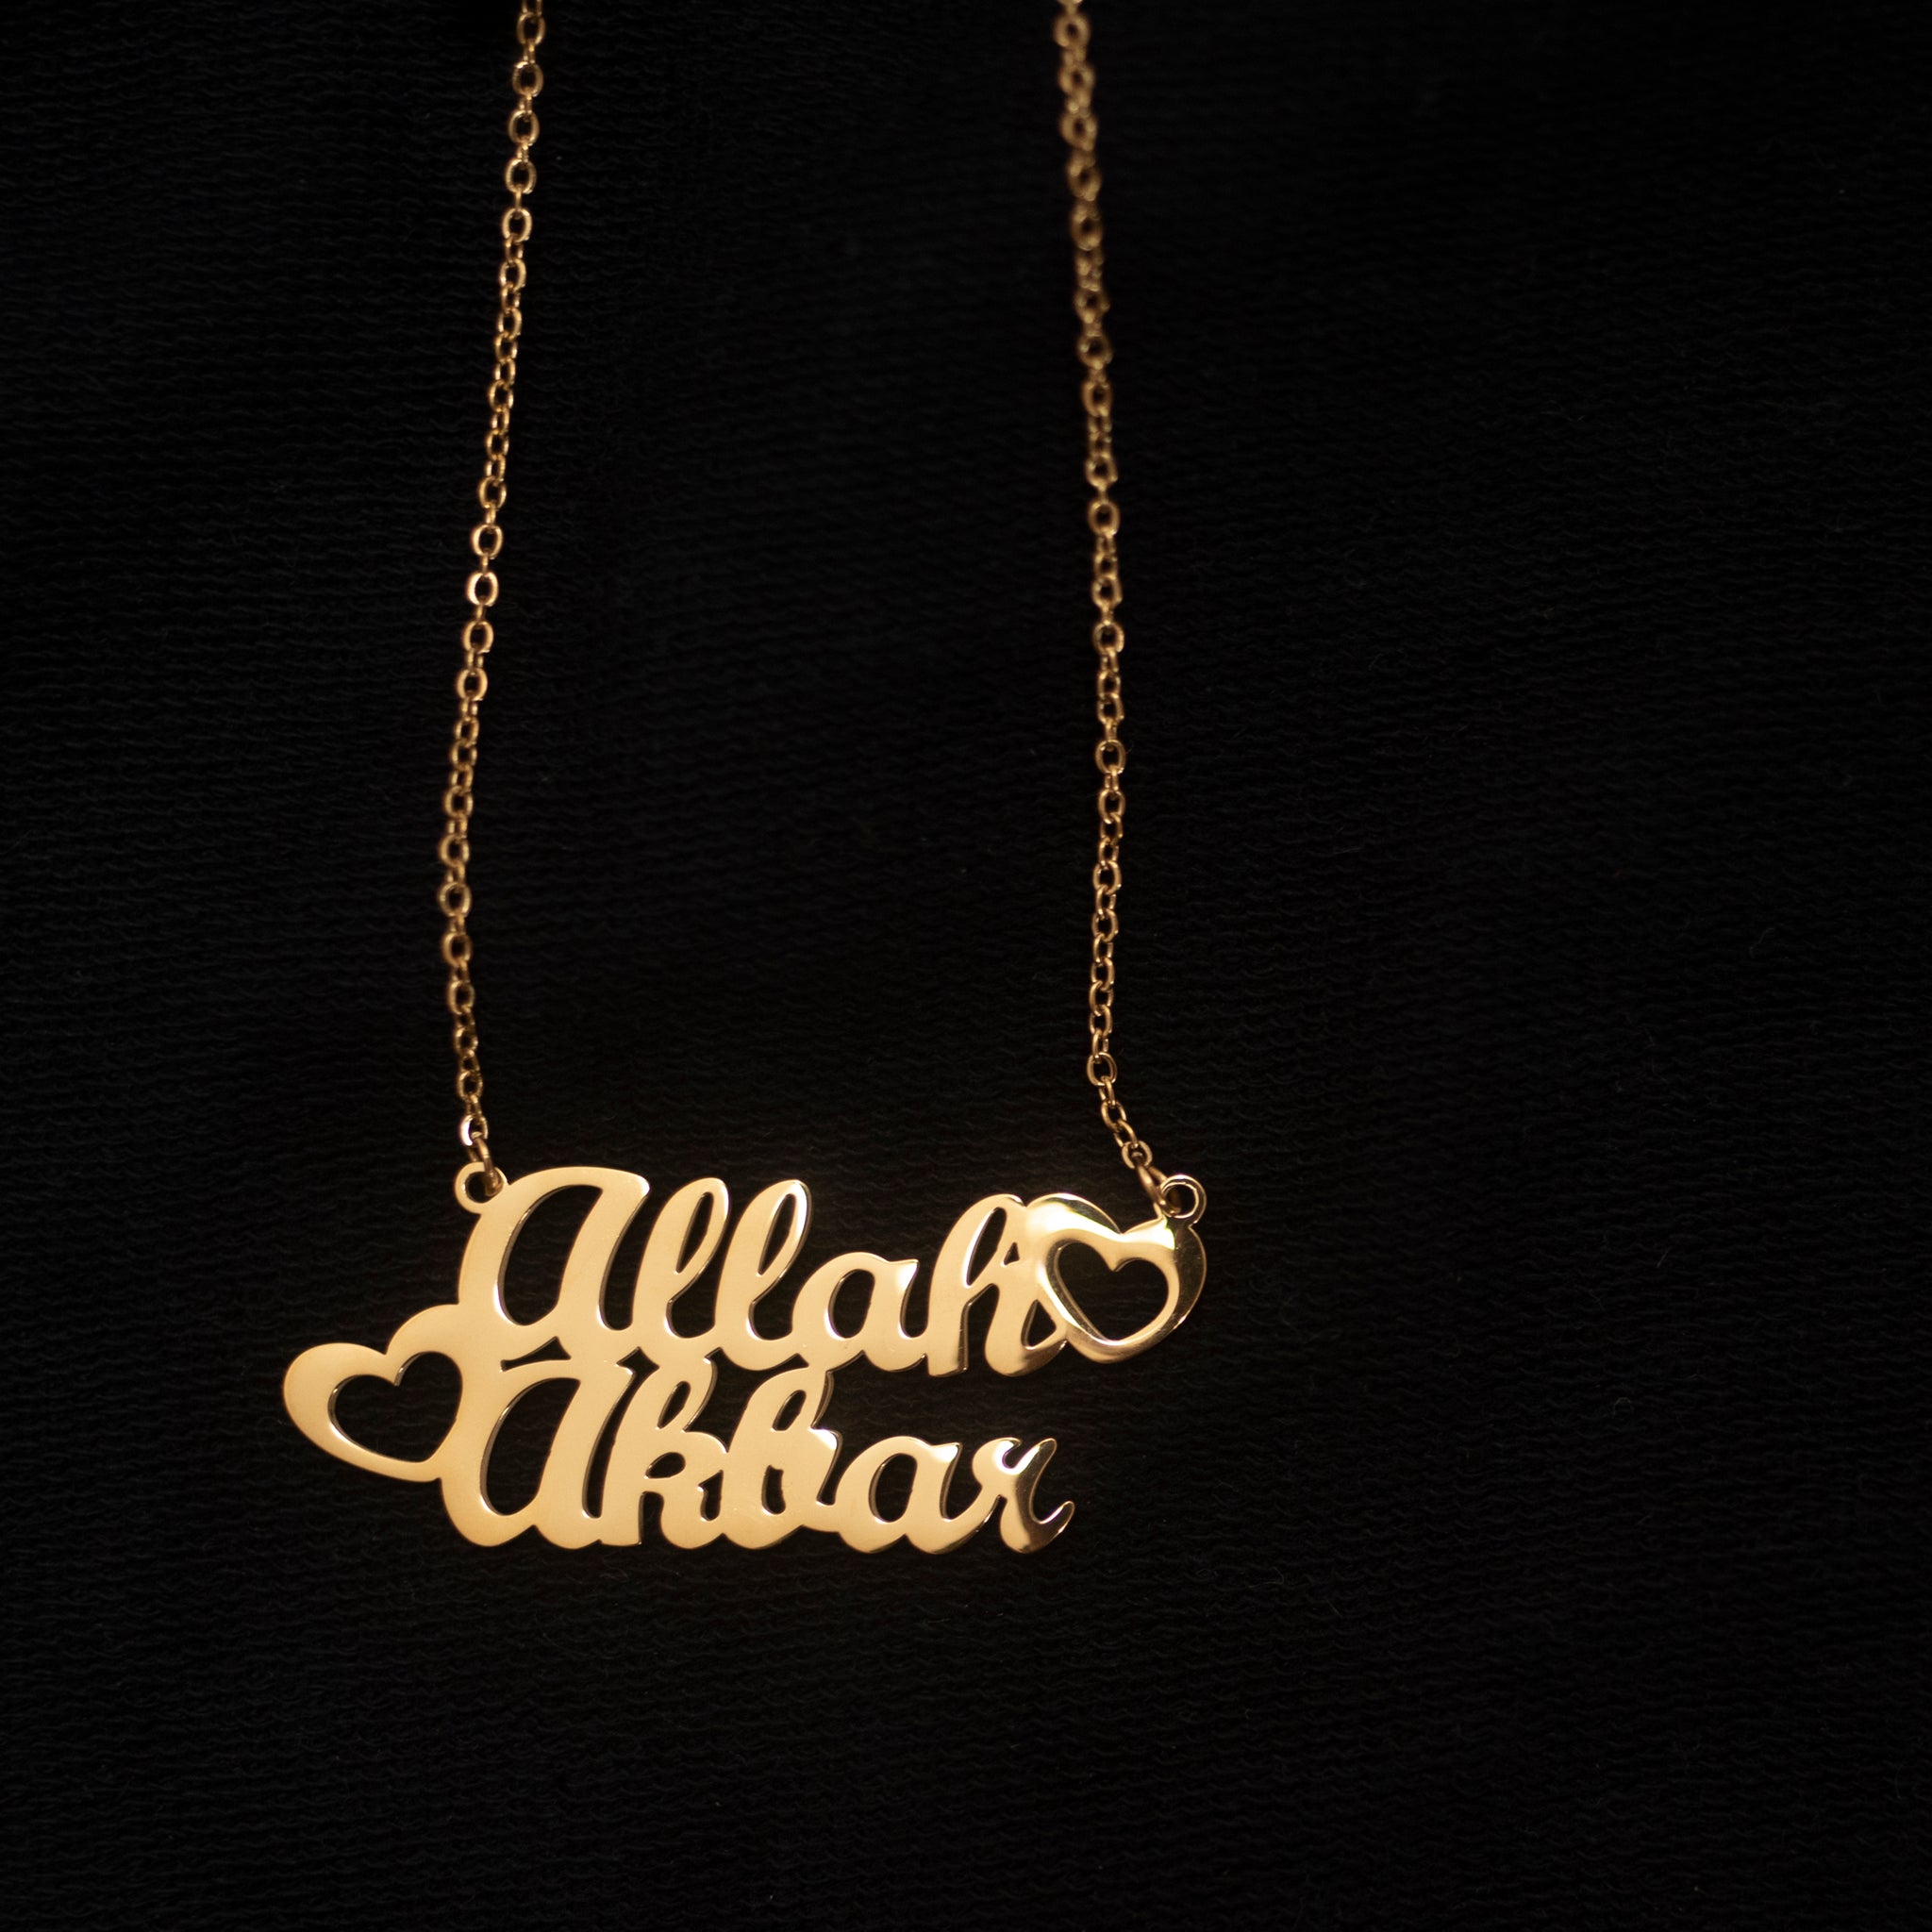 The Say It Loud and Say It Proud Allah Akbar Necklace